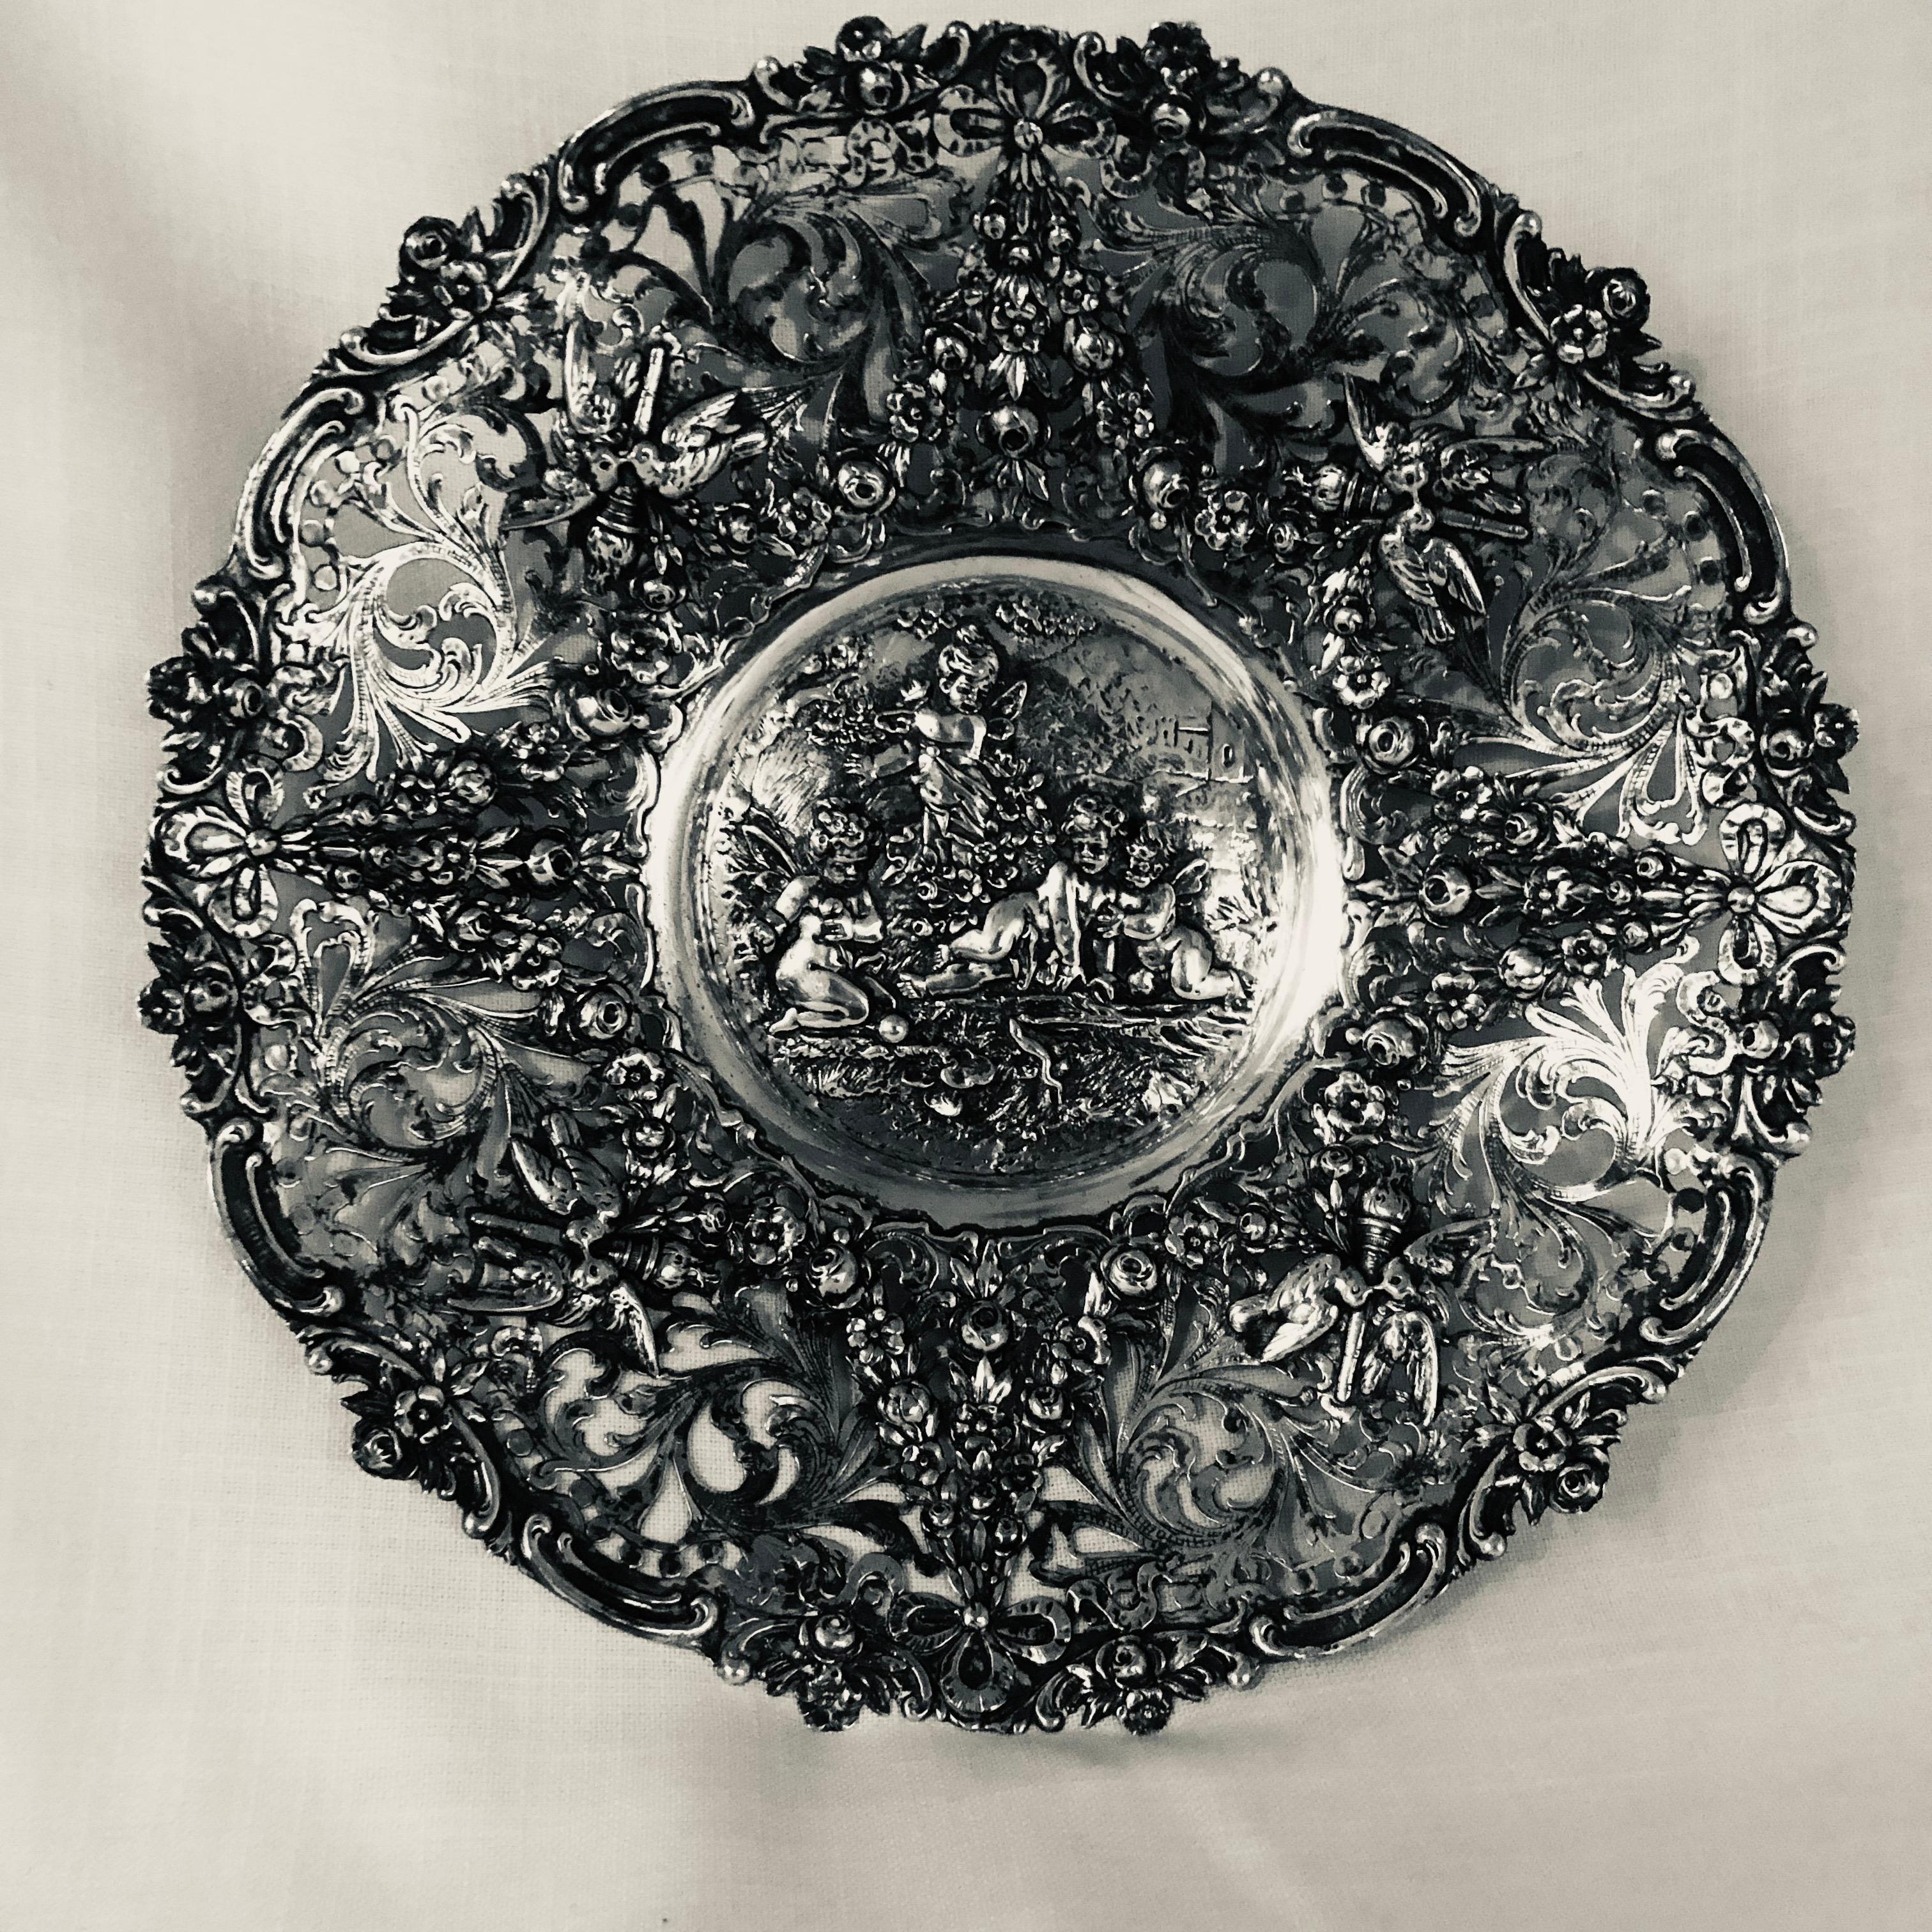 I am offering this fabulous openwork 800 silver large bowl to you. It is decorated with four raised cherubs in the center of the bowl. The profuse intricate reticulation on the sides of this silver bowl is decorated with garlands of flowers. On each